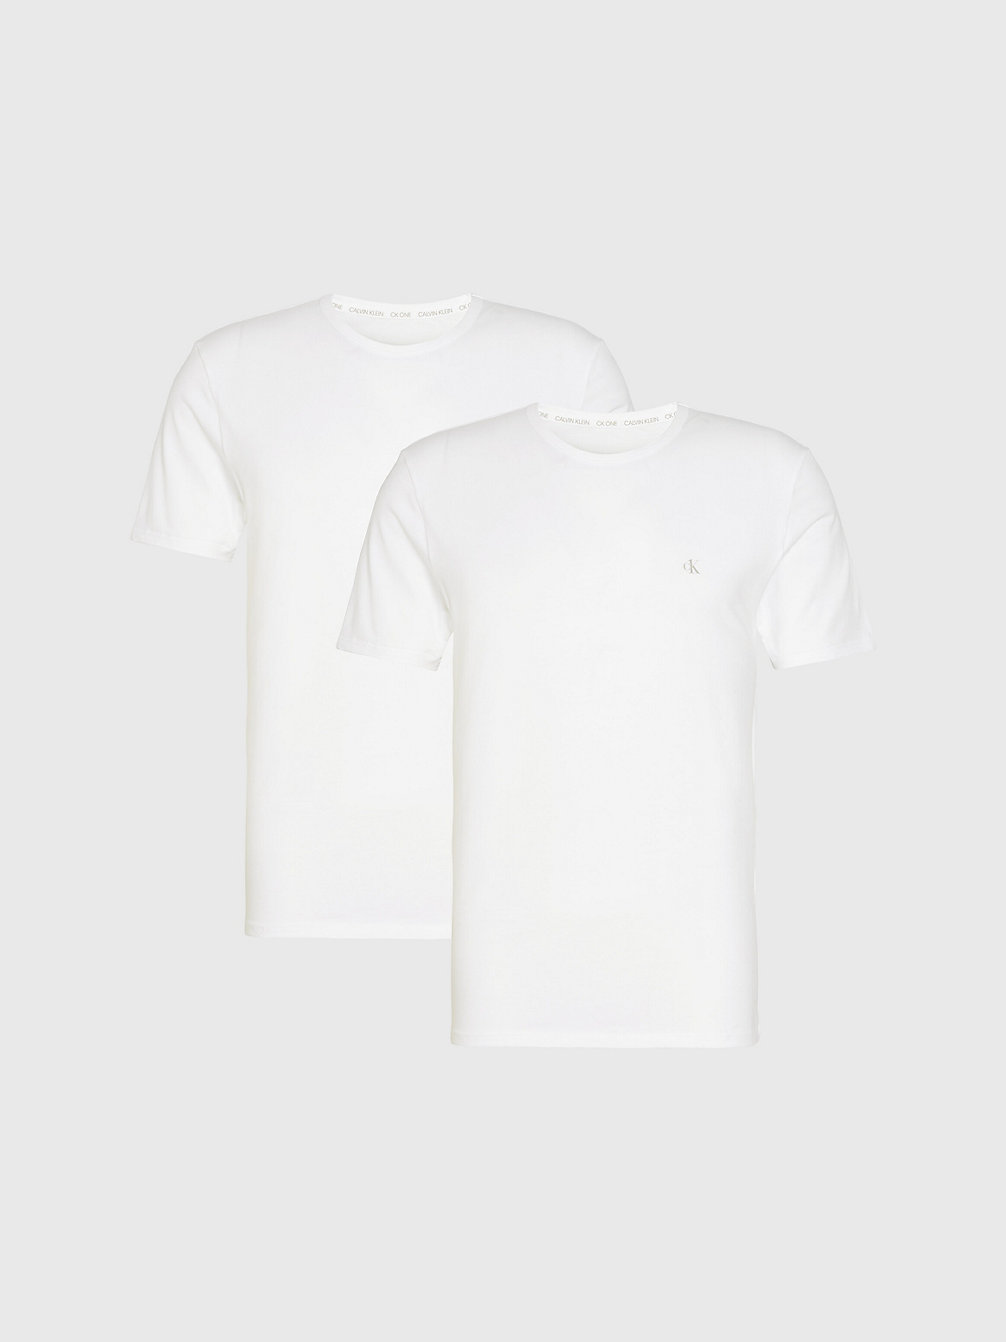 WHITE 2 Pack Lounge T-Shirts - CK One undefined men Calvin Klein